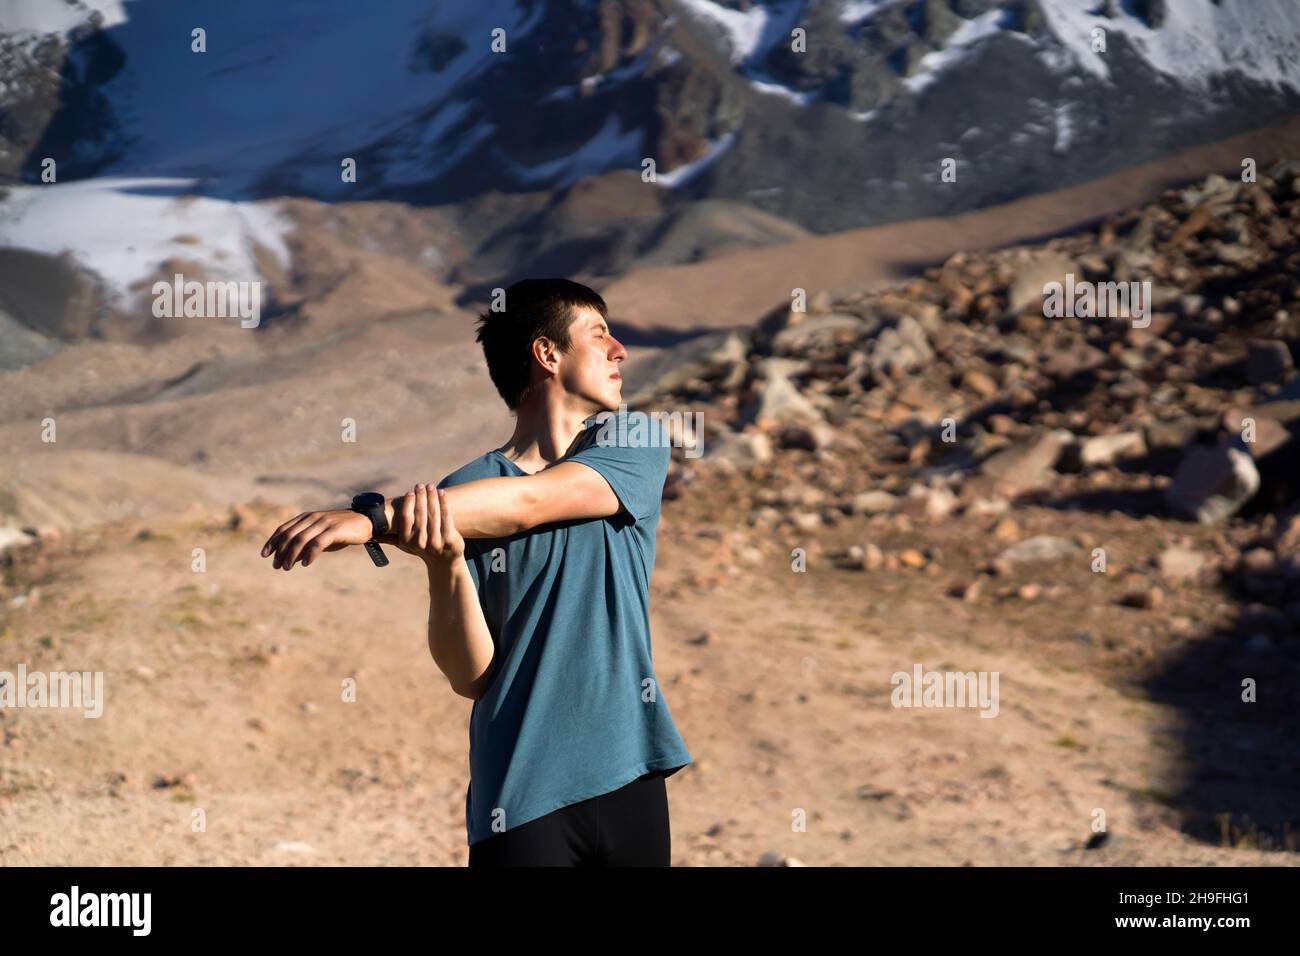 Man is warming up before running outdoor. Stock Photo